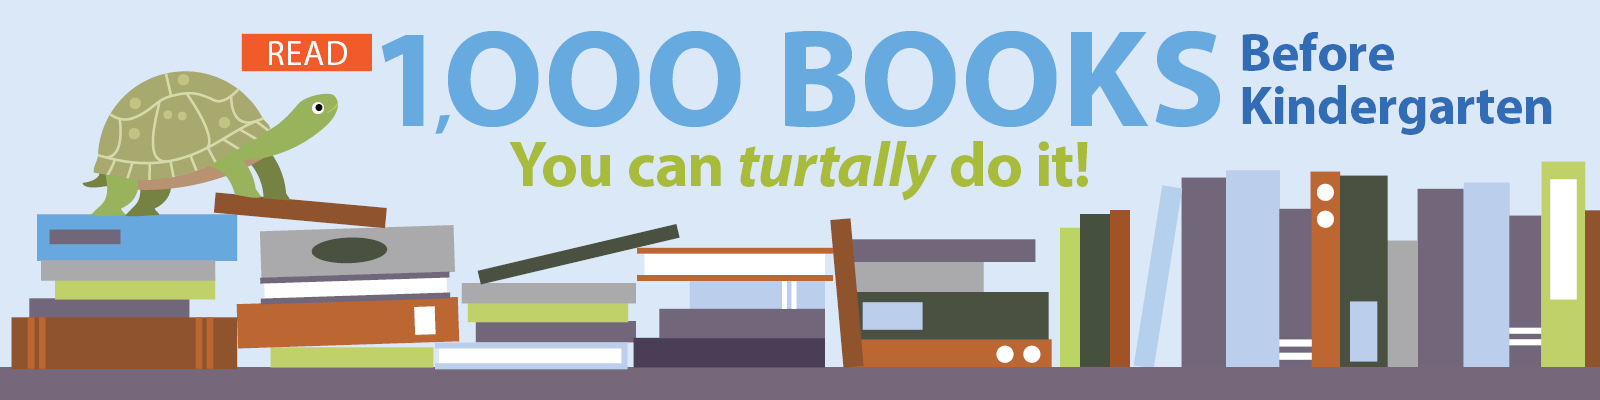 Read 1000 books before kindergarten. You can turtally do it!